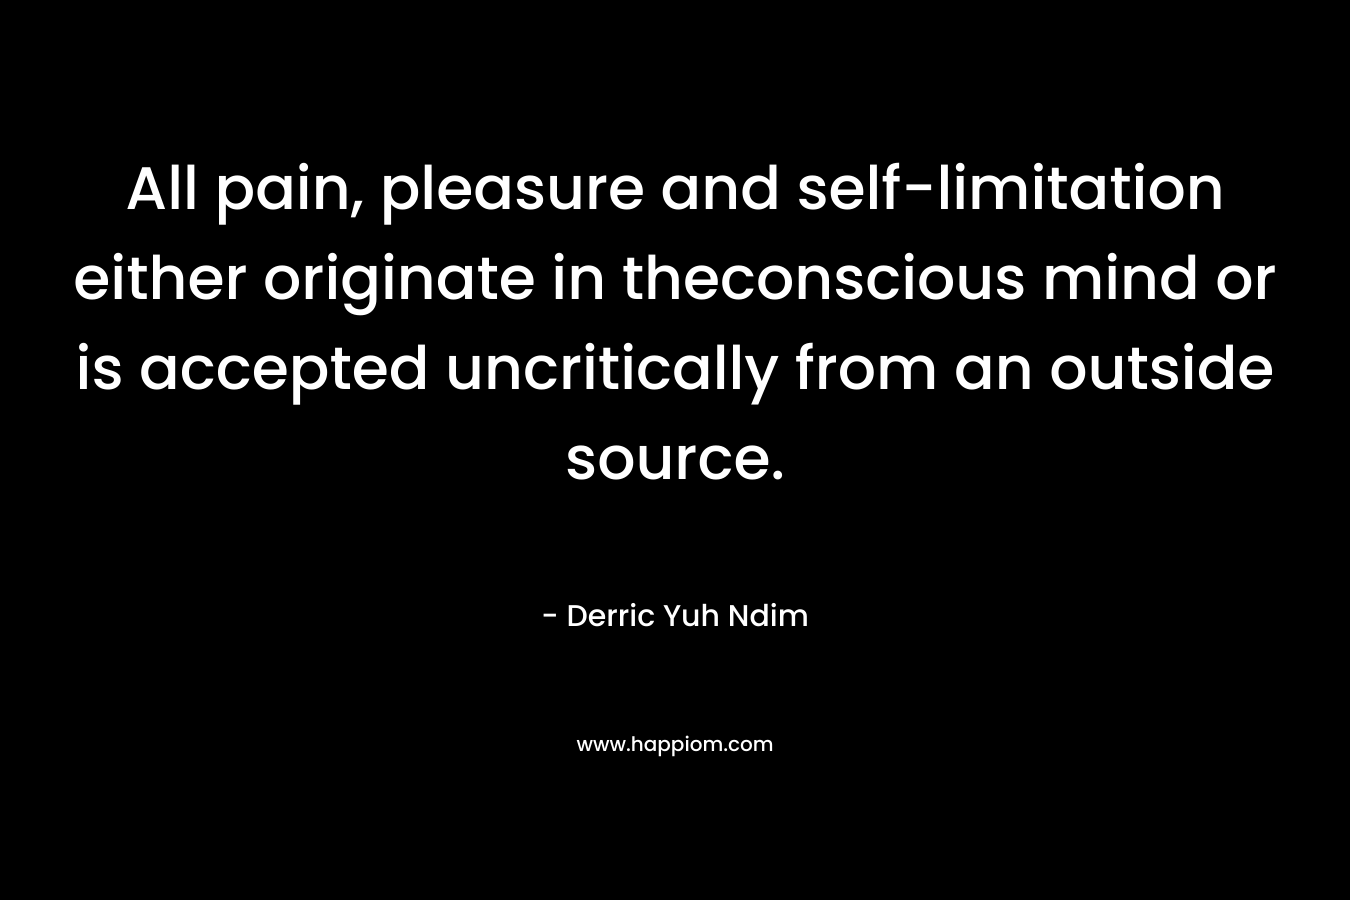 All pain, pleasure and self-limitation either originate in theconscious mind or is accepted uncritically from an outside source.